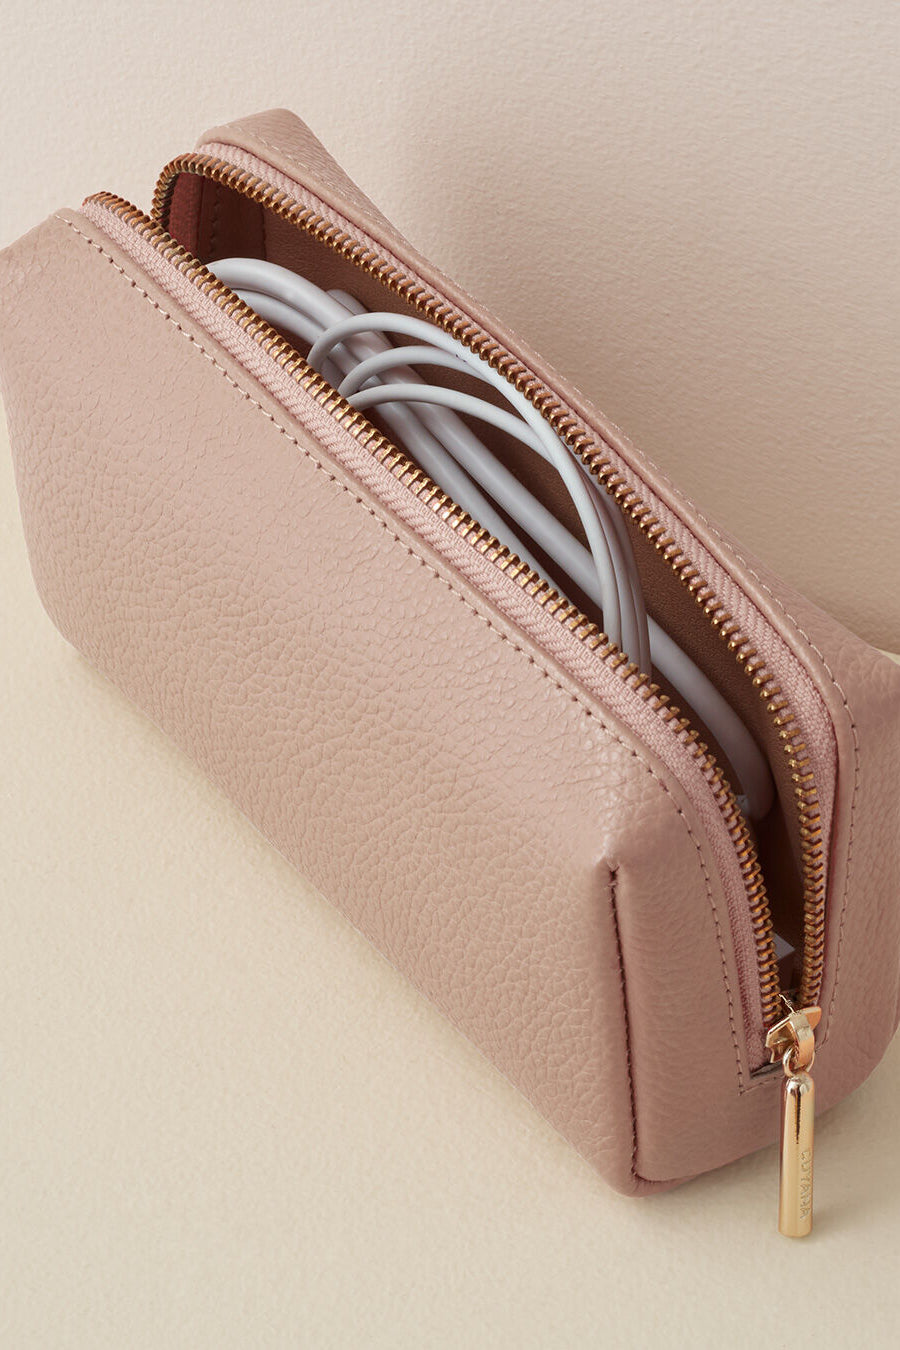 My everyday bag by @cuyana. The gorgeous Oversized Double Loop Bag